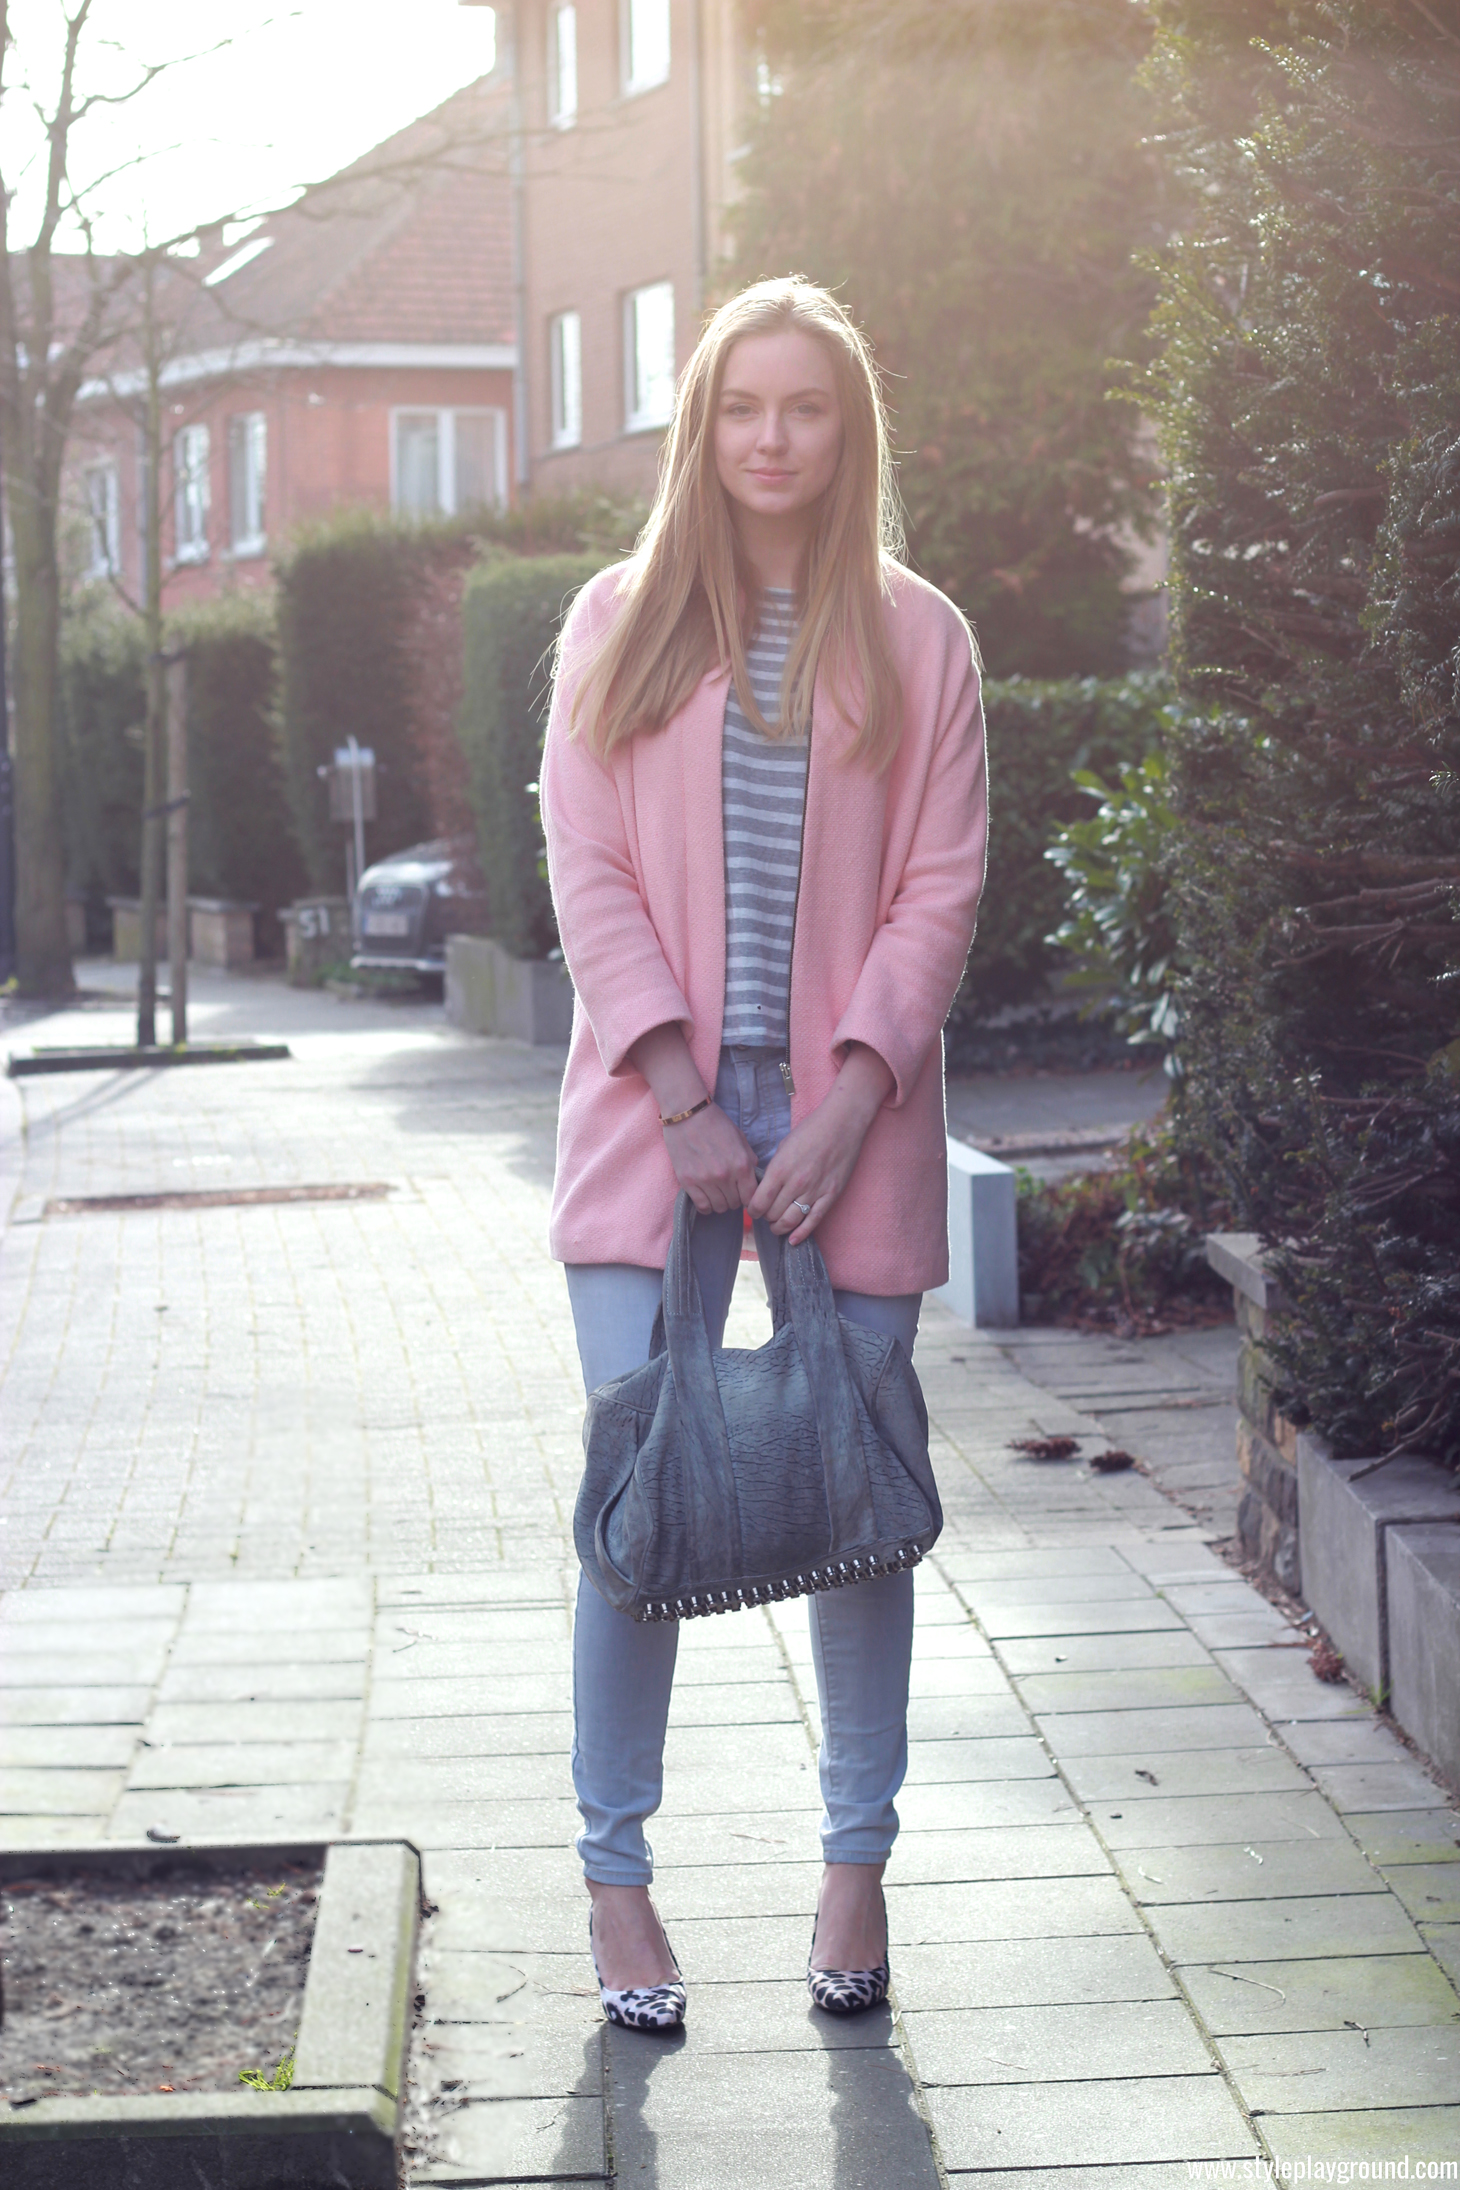 Axelle Blanpain of Style playground is wearing a Zara coat, J Crew top, American Eagle jeans, Alexander Wang bag & Whistles pumps.